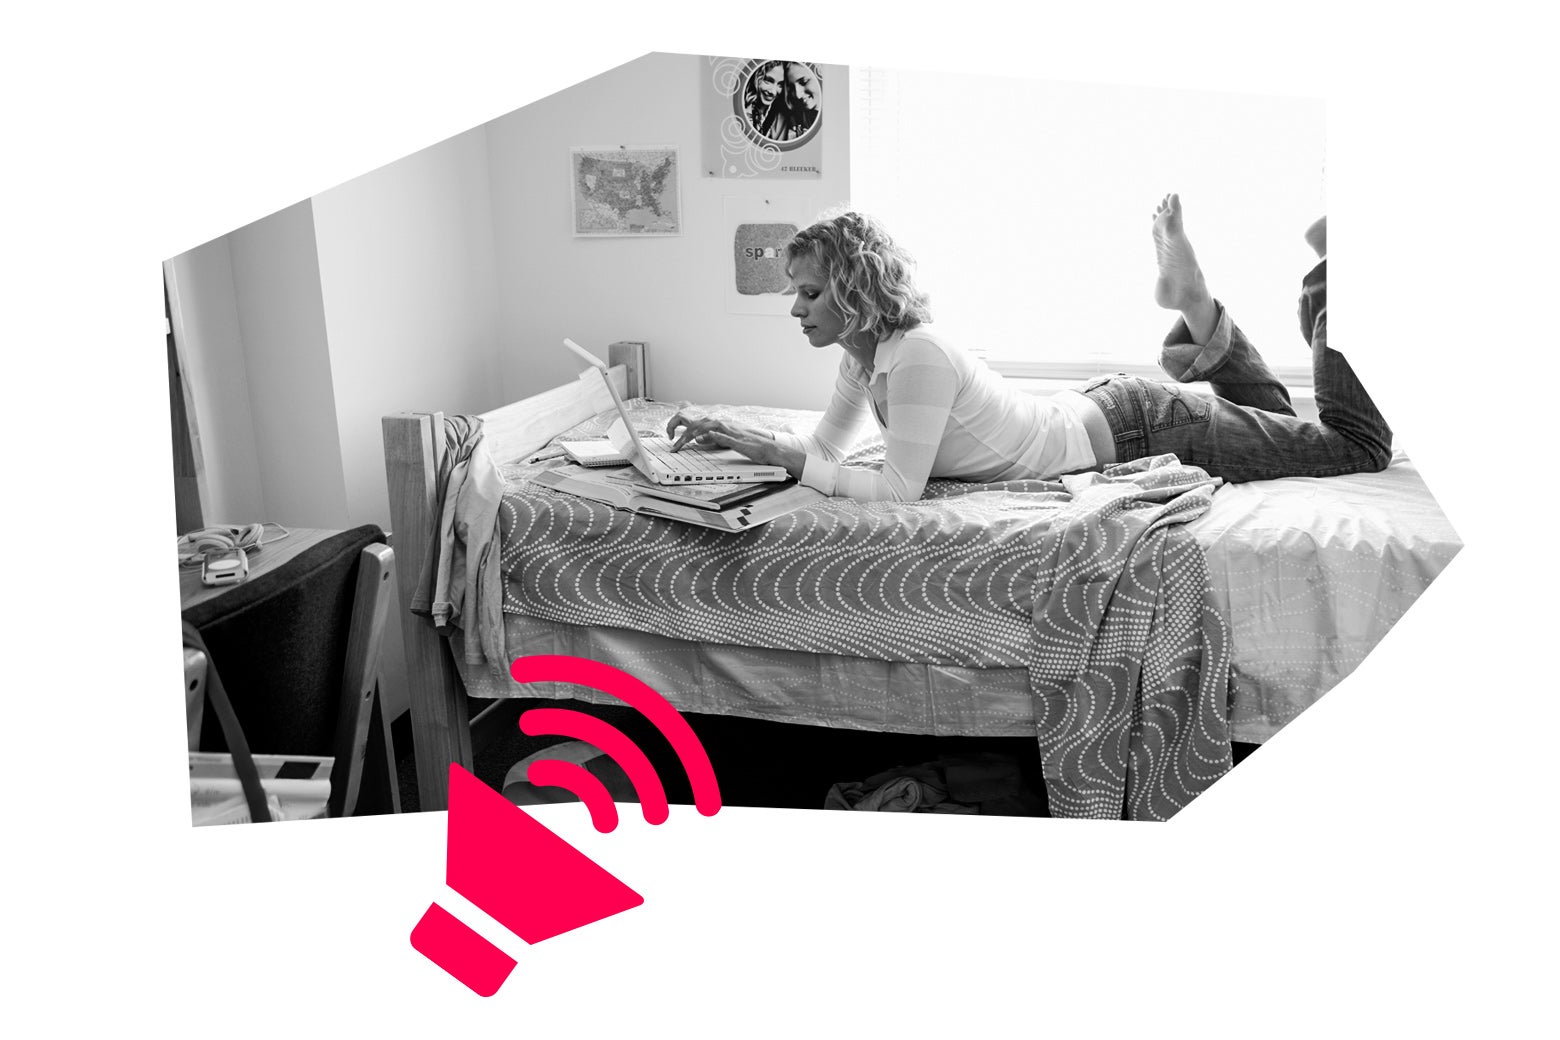 A woman lies on a bed in a dorm room; an illustrated sound icon broadcasts at her.